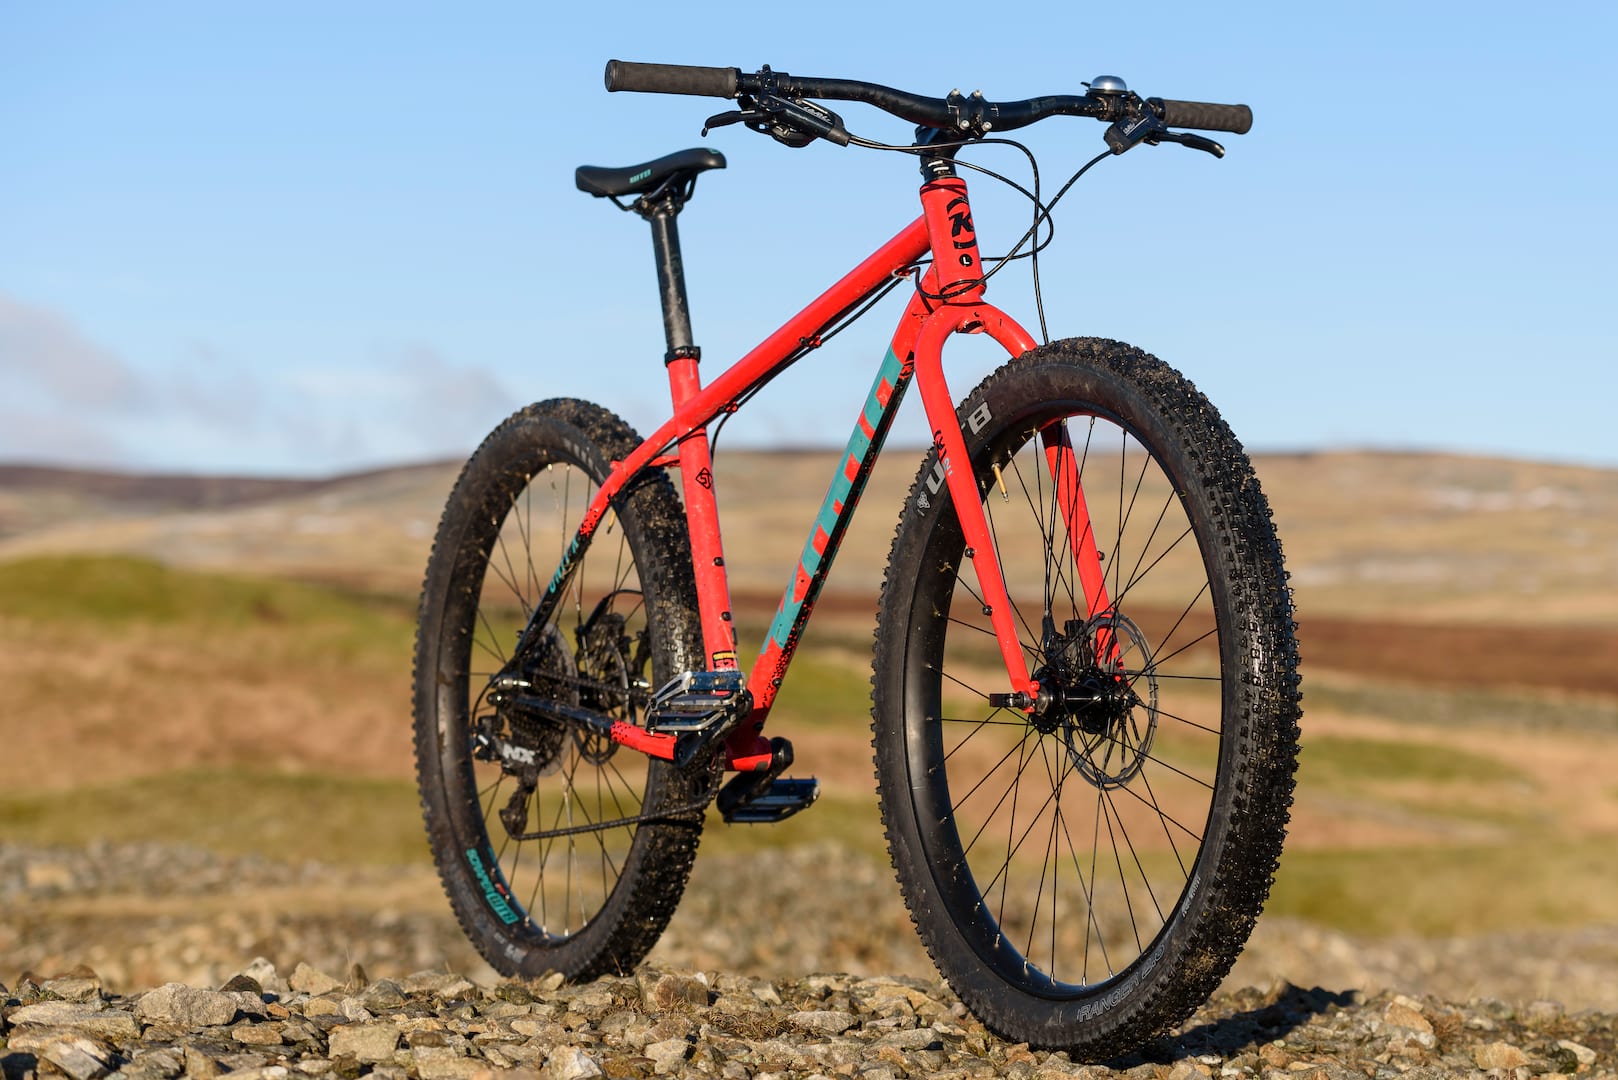 Review: Kona's Unit X is like a singlespeed, but with 10 more 